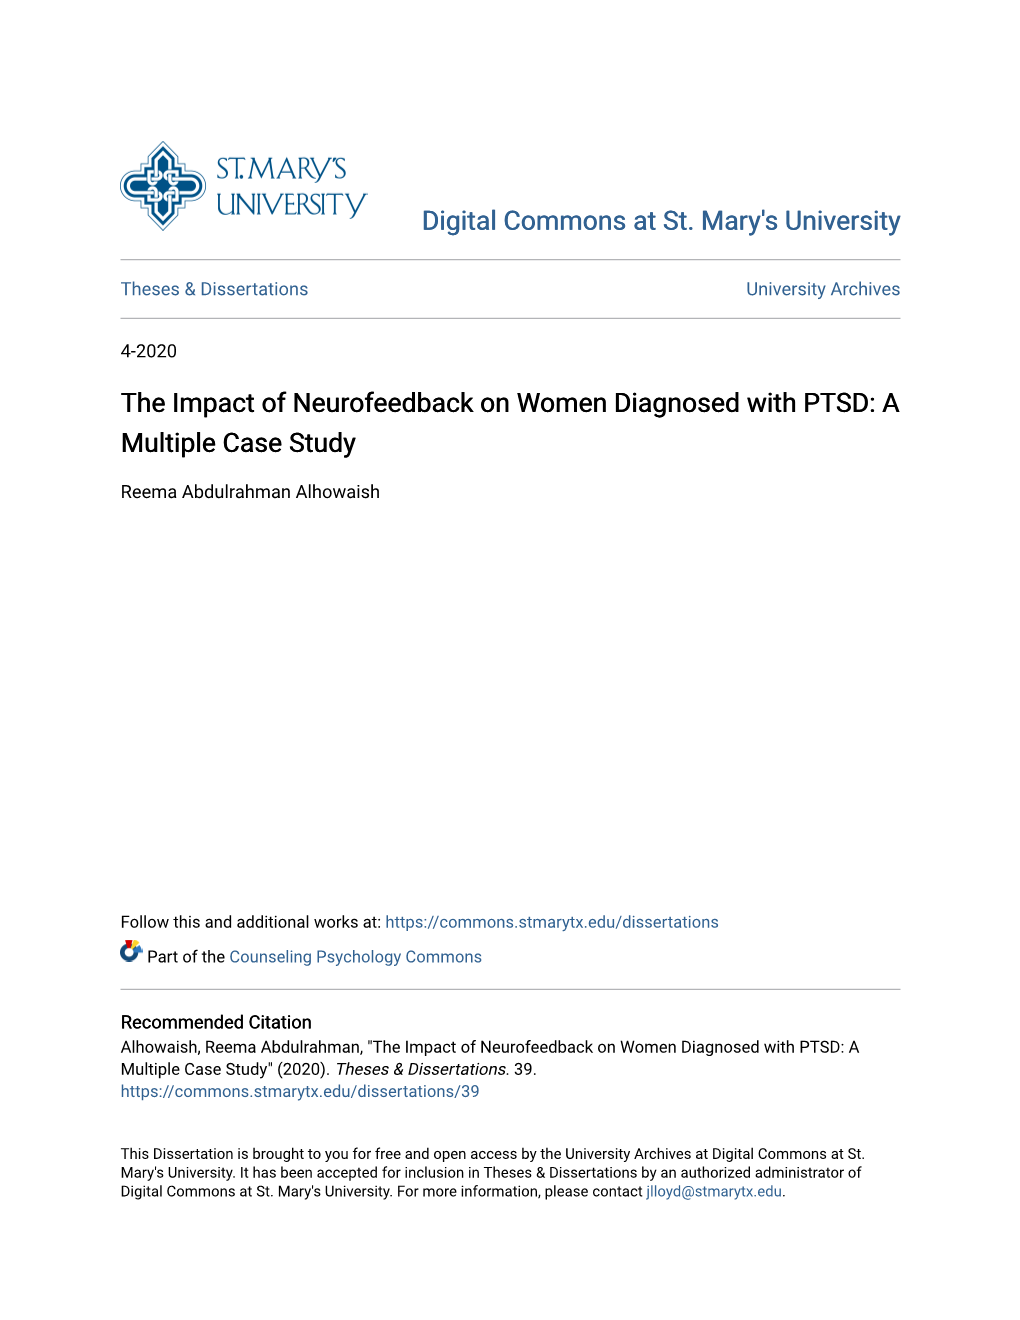 The Impact of Neurofeedback on Women Diagnosed with PTSD: a Multiple Case Study